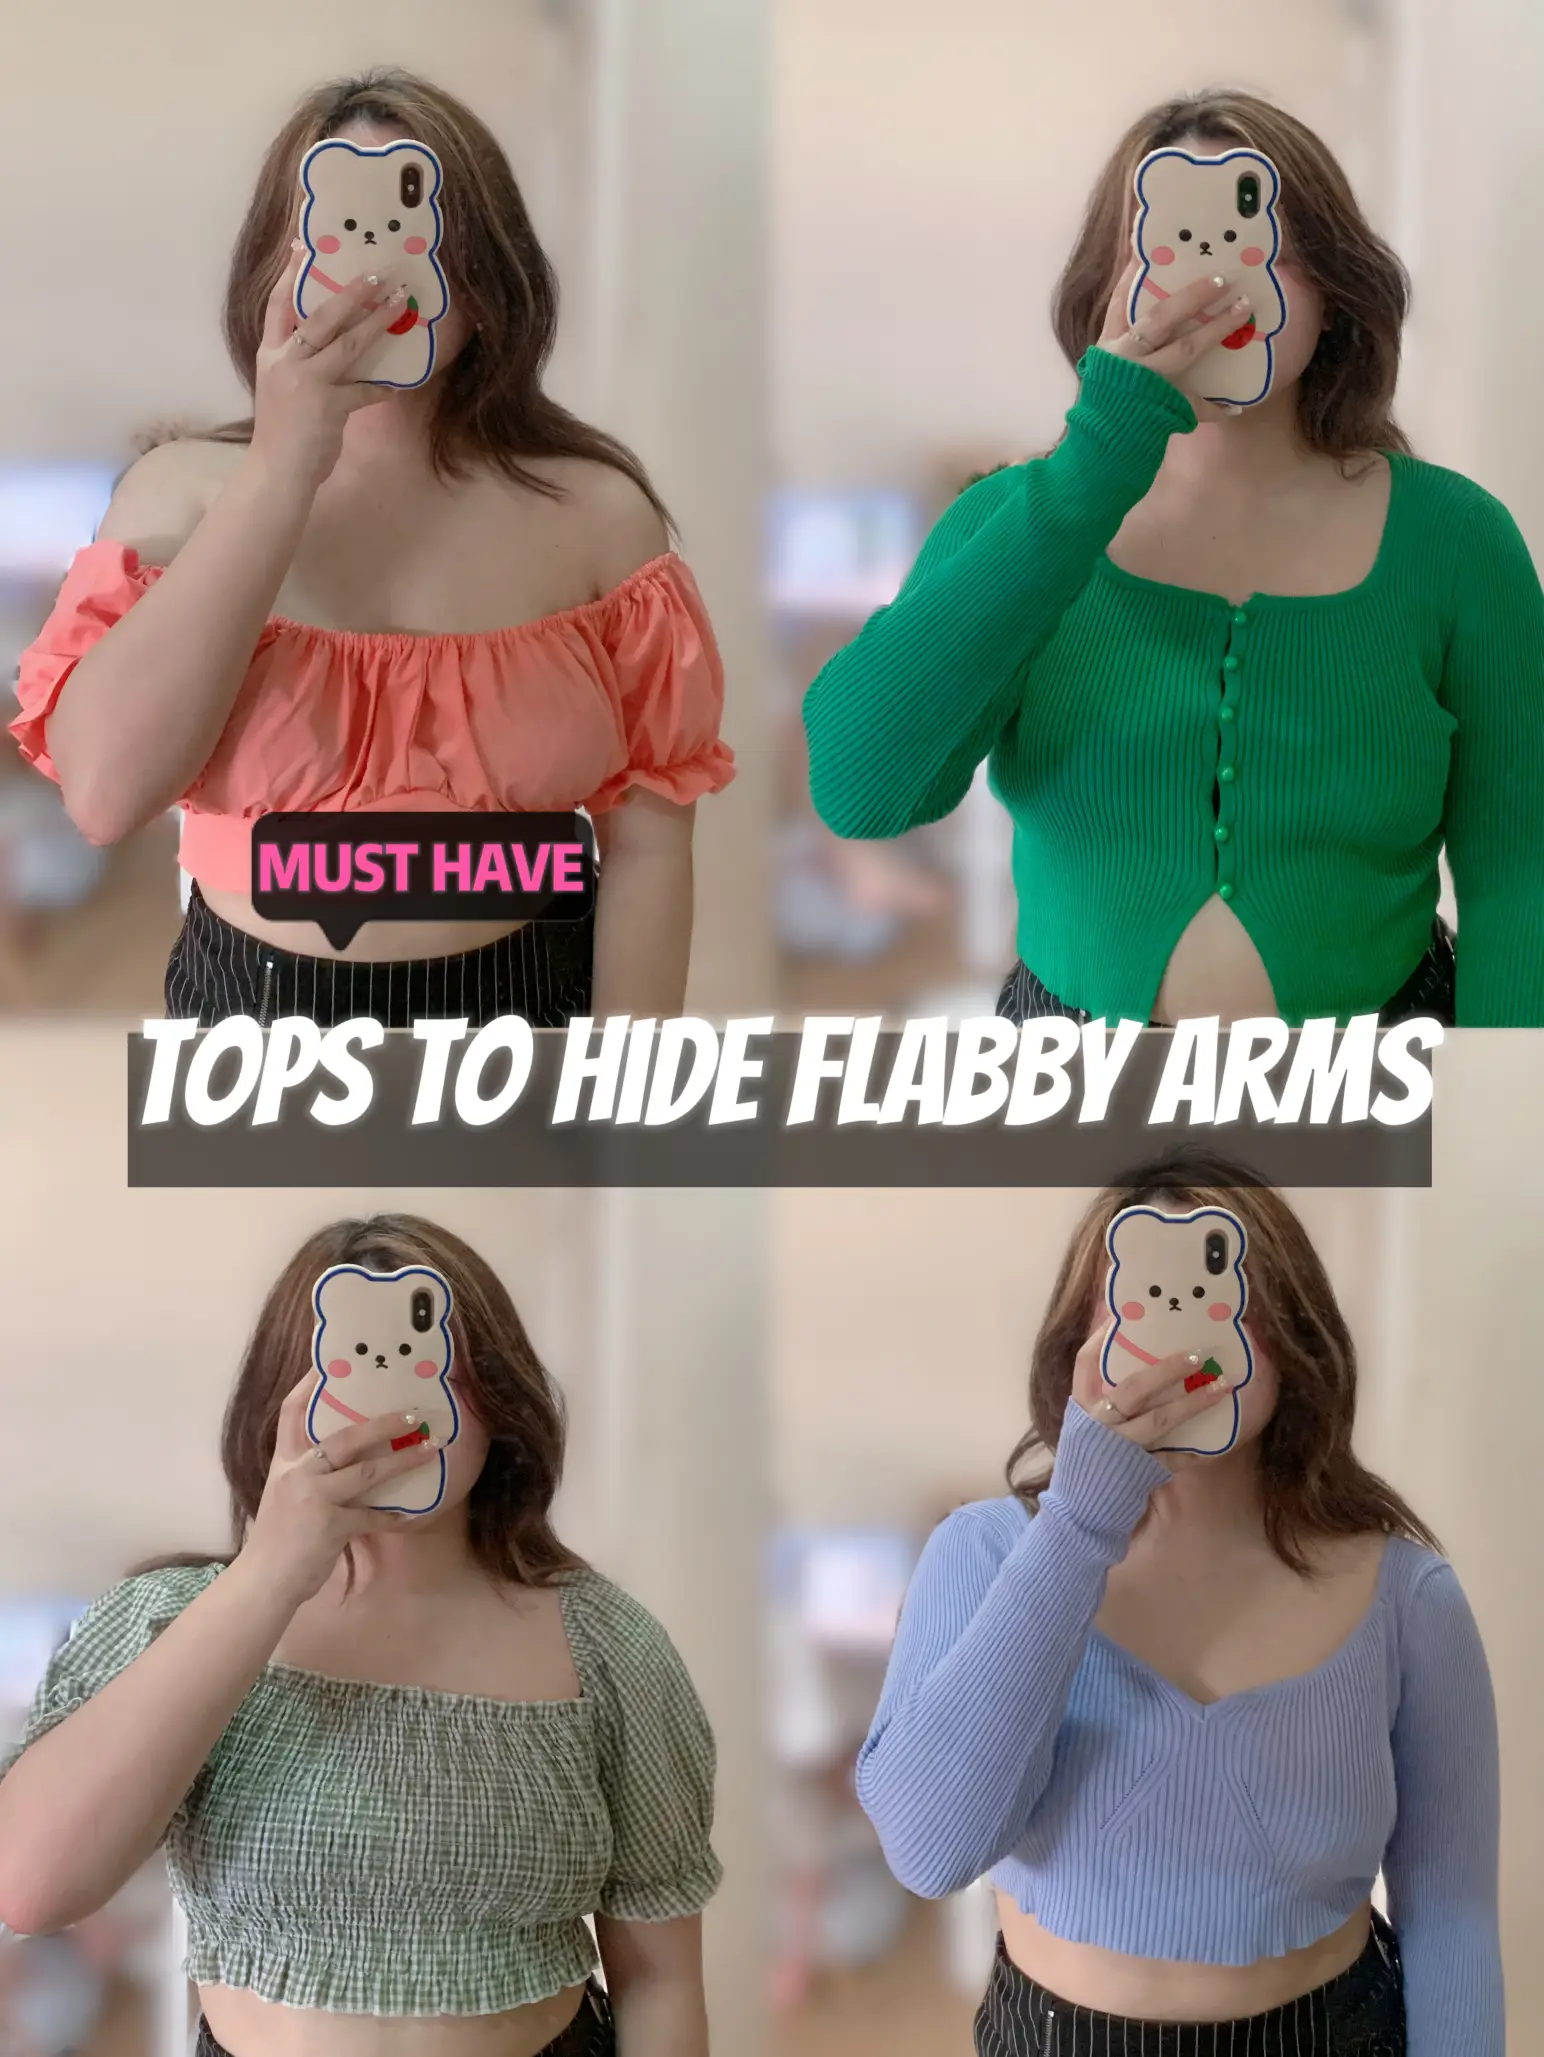 10 Ways To Hide Flabby Arms In Sleeveless Outfit